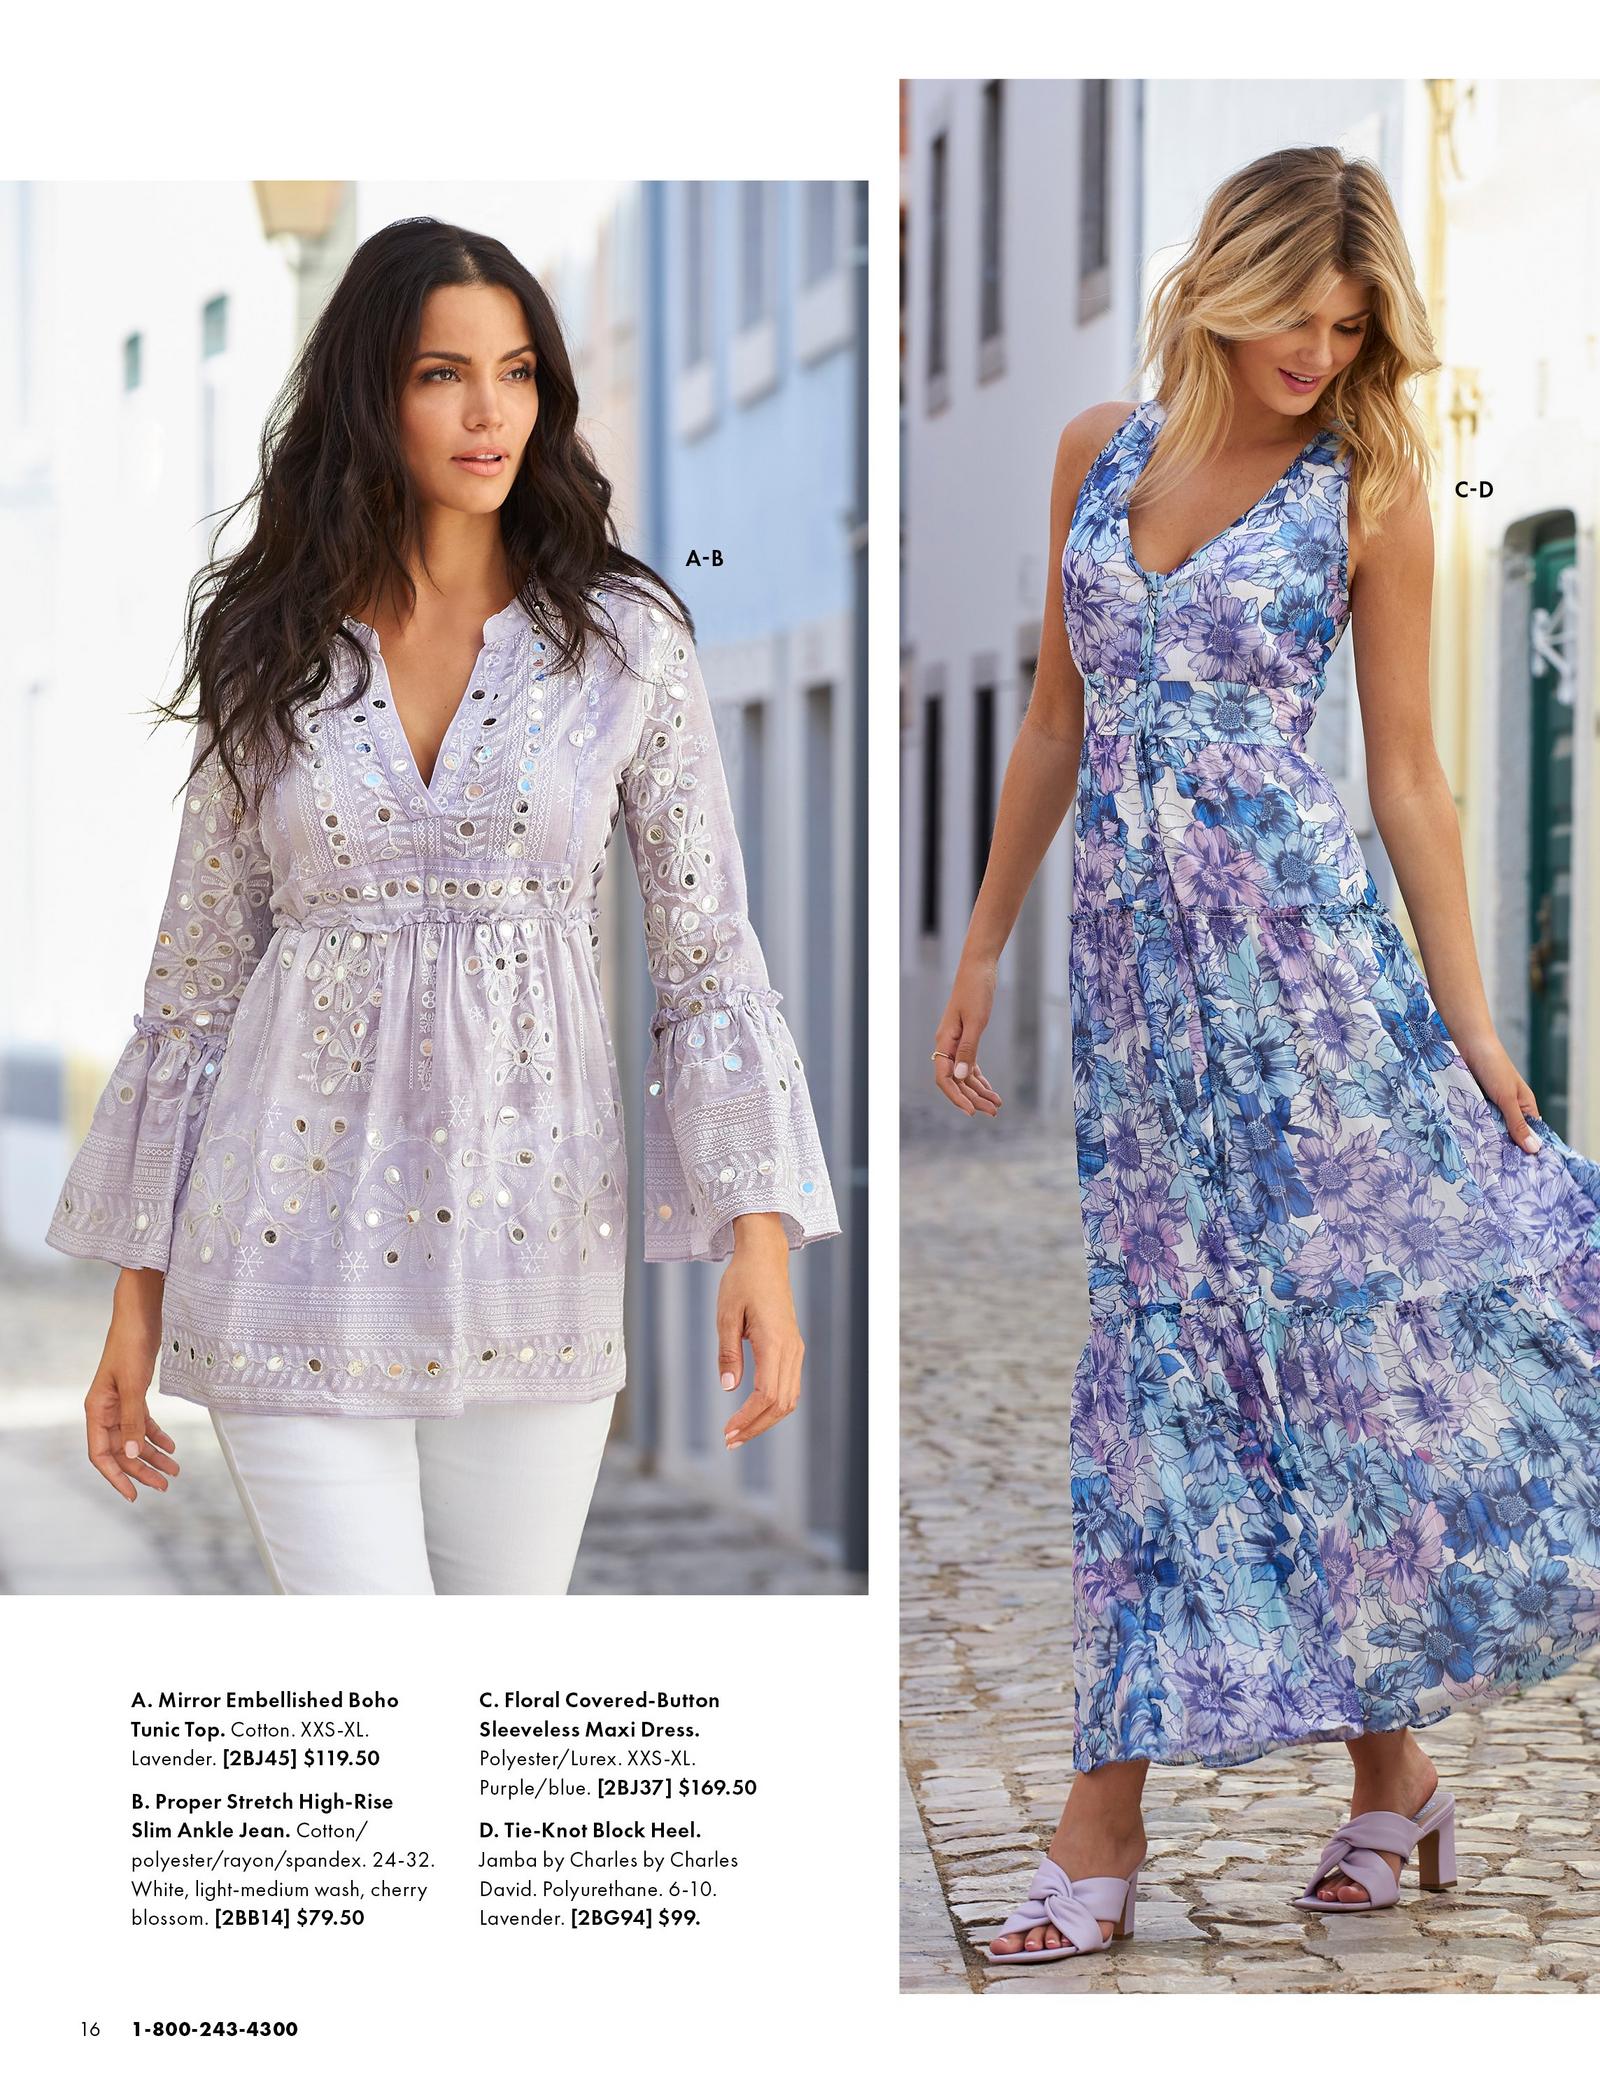 left model wearing a light lavender mirror embellished boho tunic top and white jeans. right model wearing a blue floral print covered-button sleeveless maxi dress and lavender block heels.